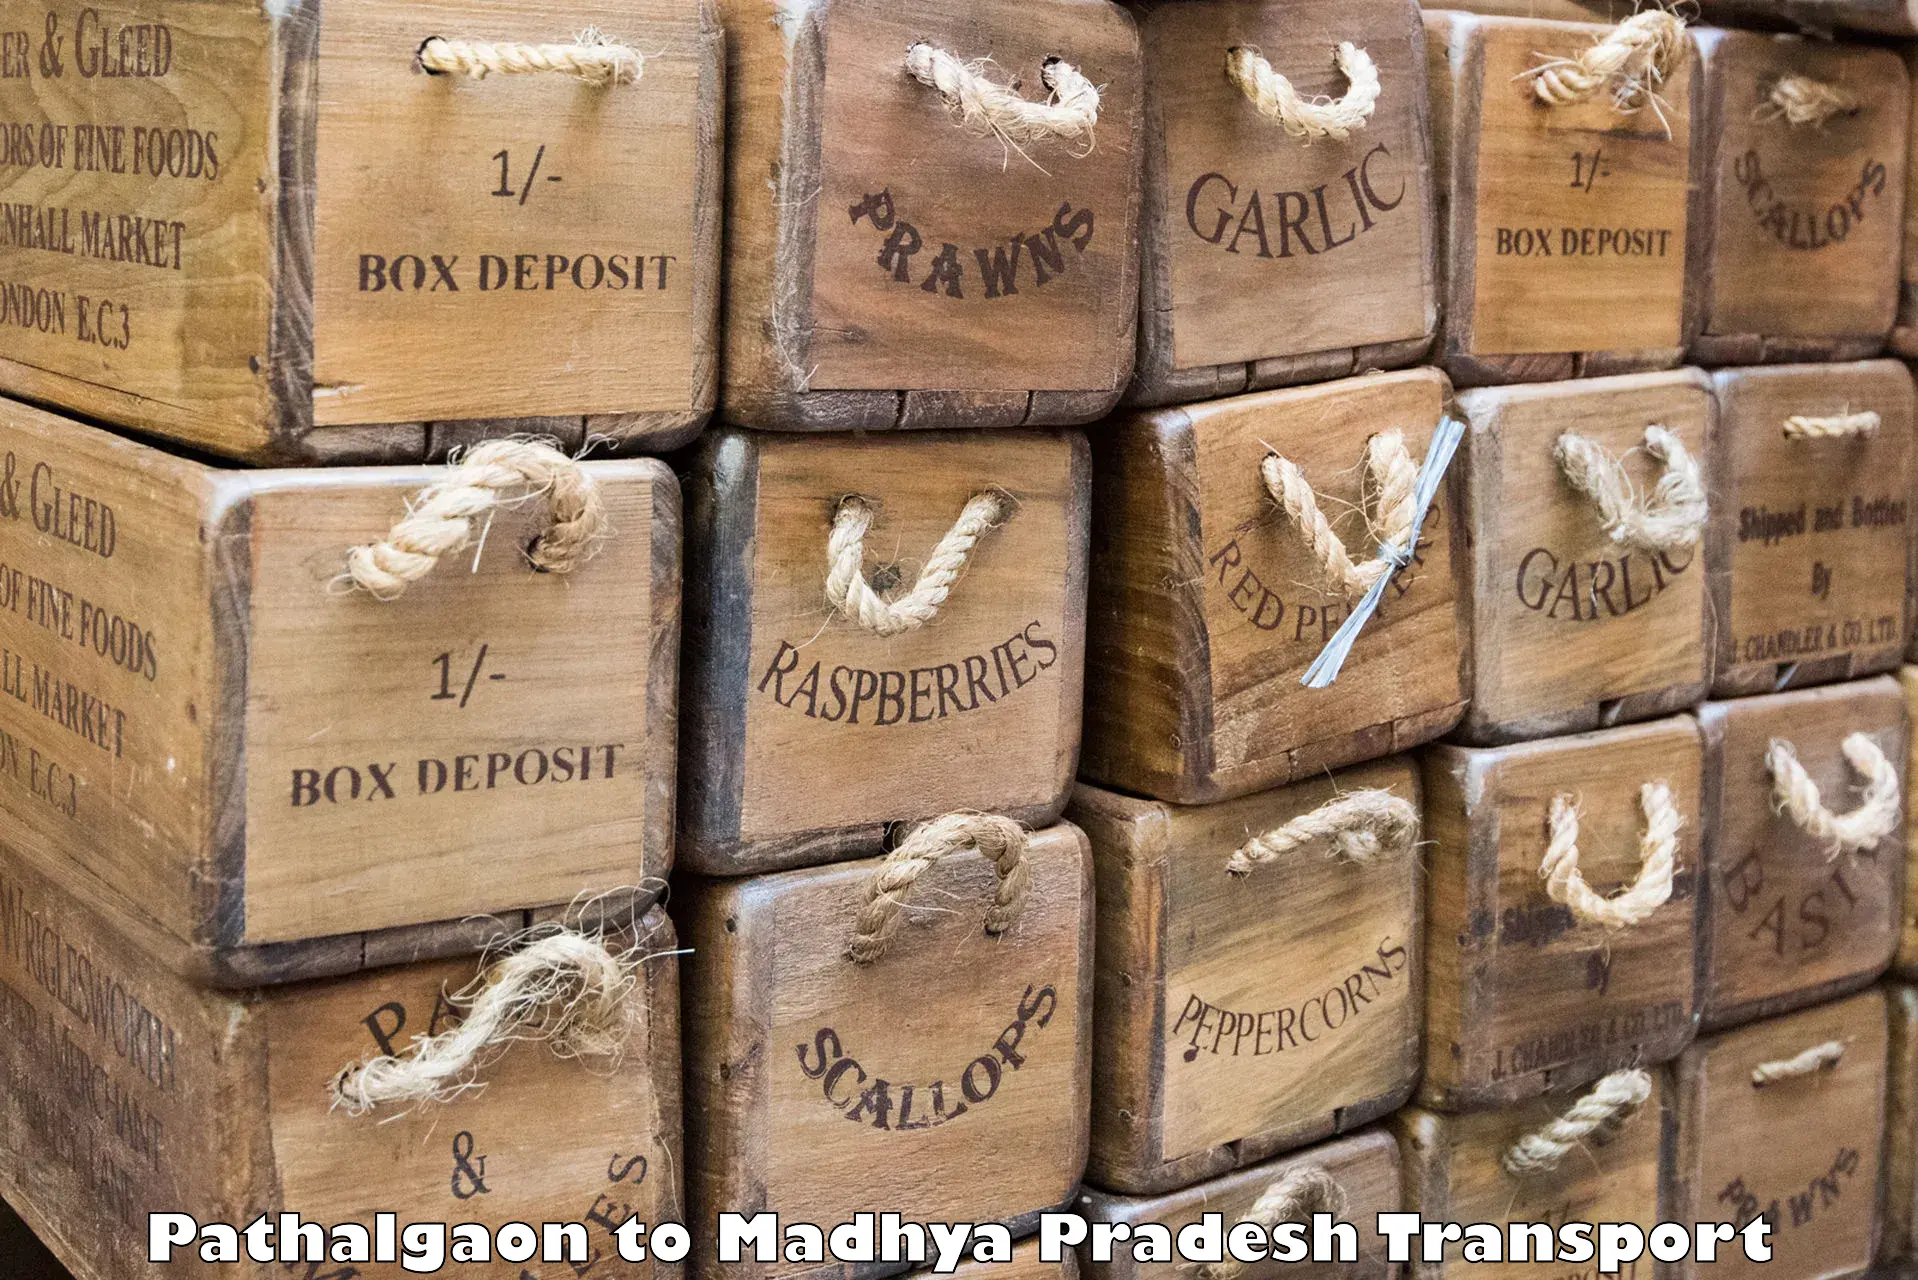 Air freight transport services Pathalgaon to Sausar